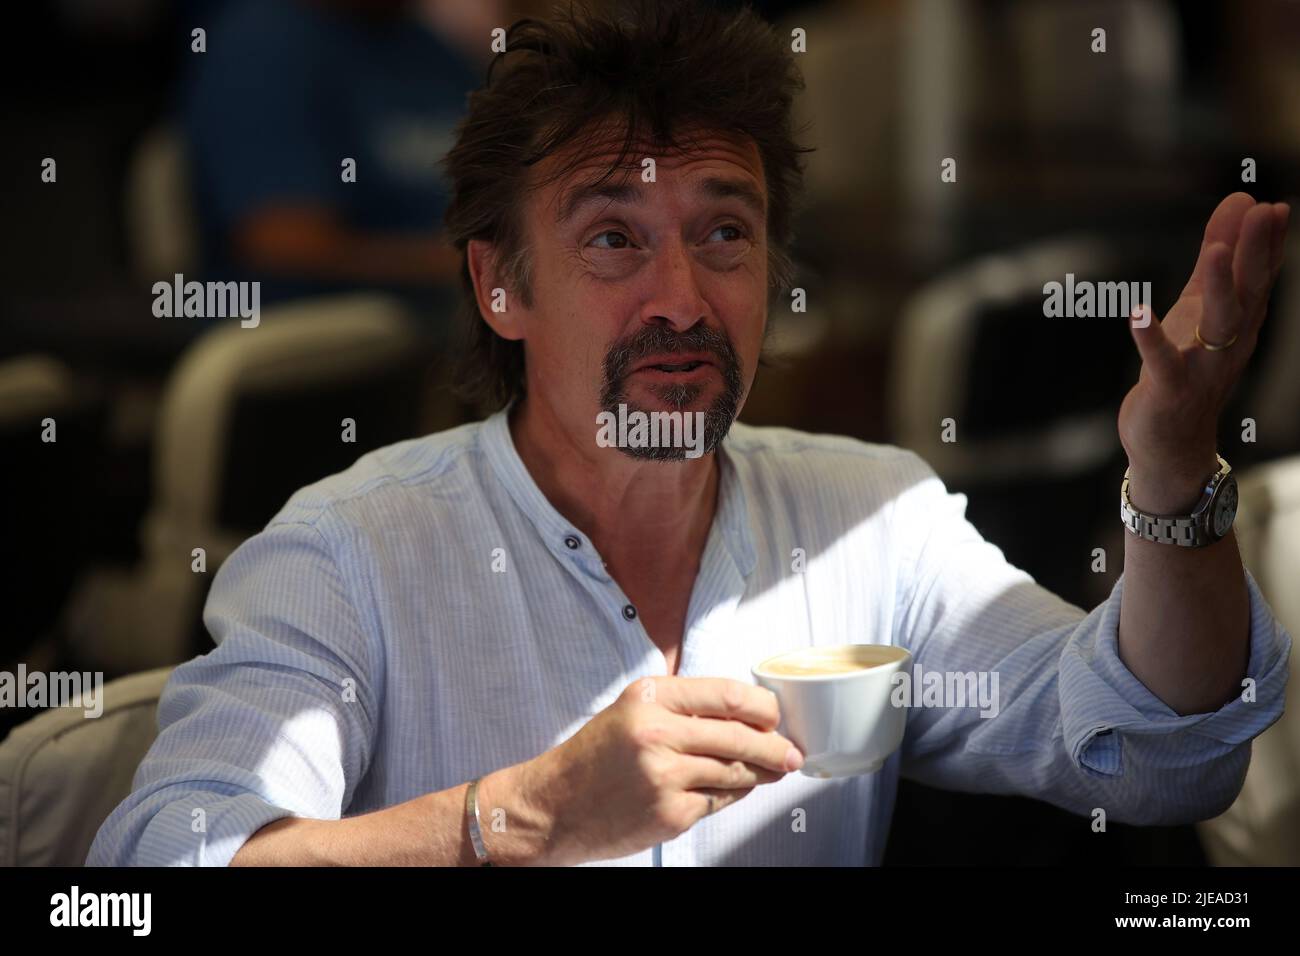 The Grand Tour star, Richard Hammond, visits Cracow, Poland, while on tour filming the show. The Grand Tour is a British motoring television series, created by Jeremy Clarkson, Richard Hammond, James May, and Andy Wilman, made for Amazon exclusively for its online streaming service Amazon Prime Video which premiered in 2016. The programme was conceived in the wake of the departure of Clarkson, Hammond, May and Wilman from the BBC series Top Gear. (Photo by Vito Corleone / SOPA Images/Sipa USA) Stock Photo